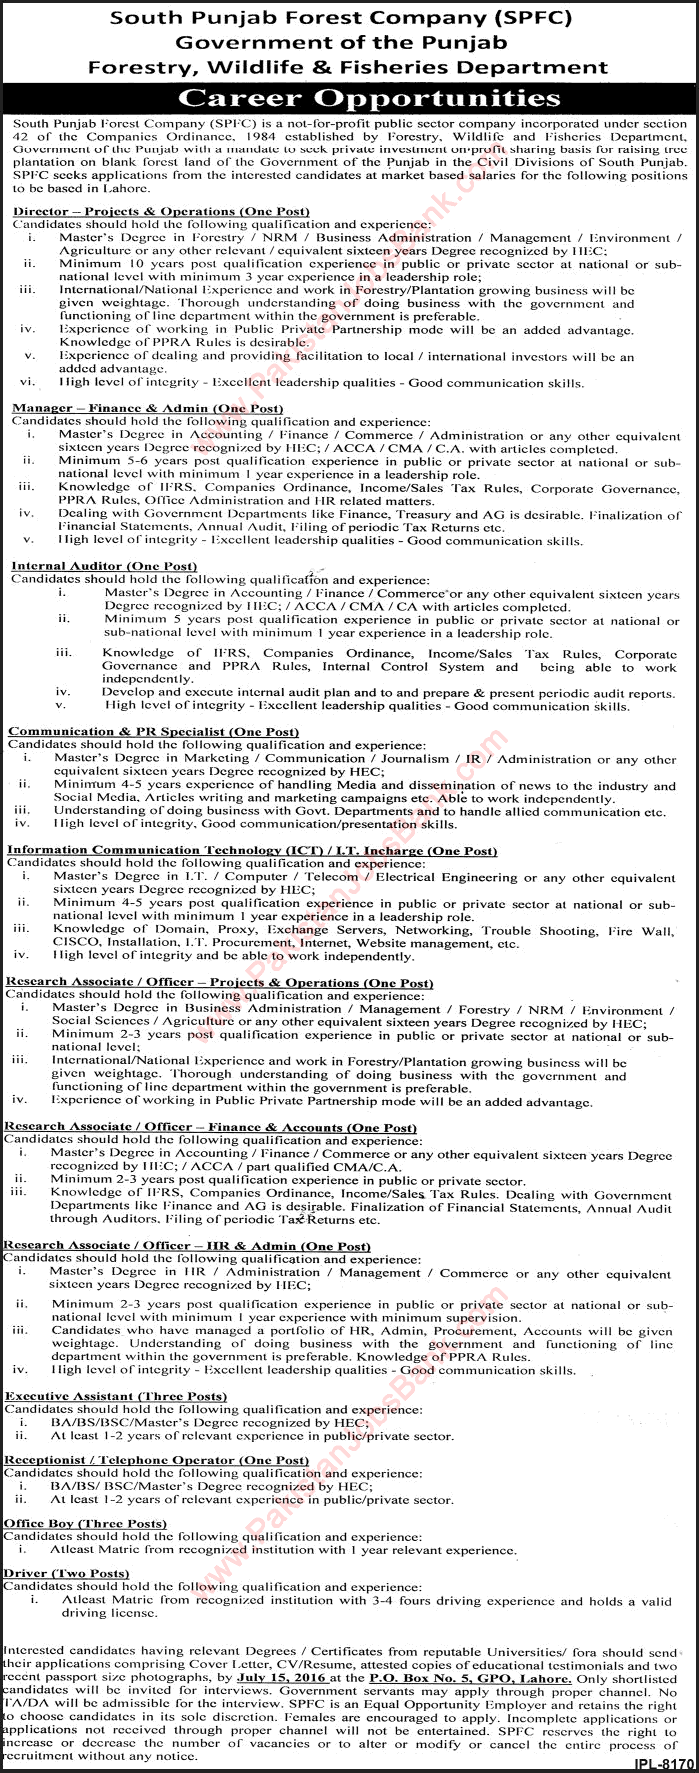 South Punjab Forest Company Lahore Jobs 2016 July SPFC Executive Assistants, Office Boys & Others Latest